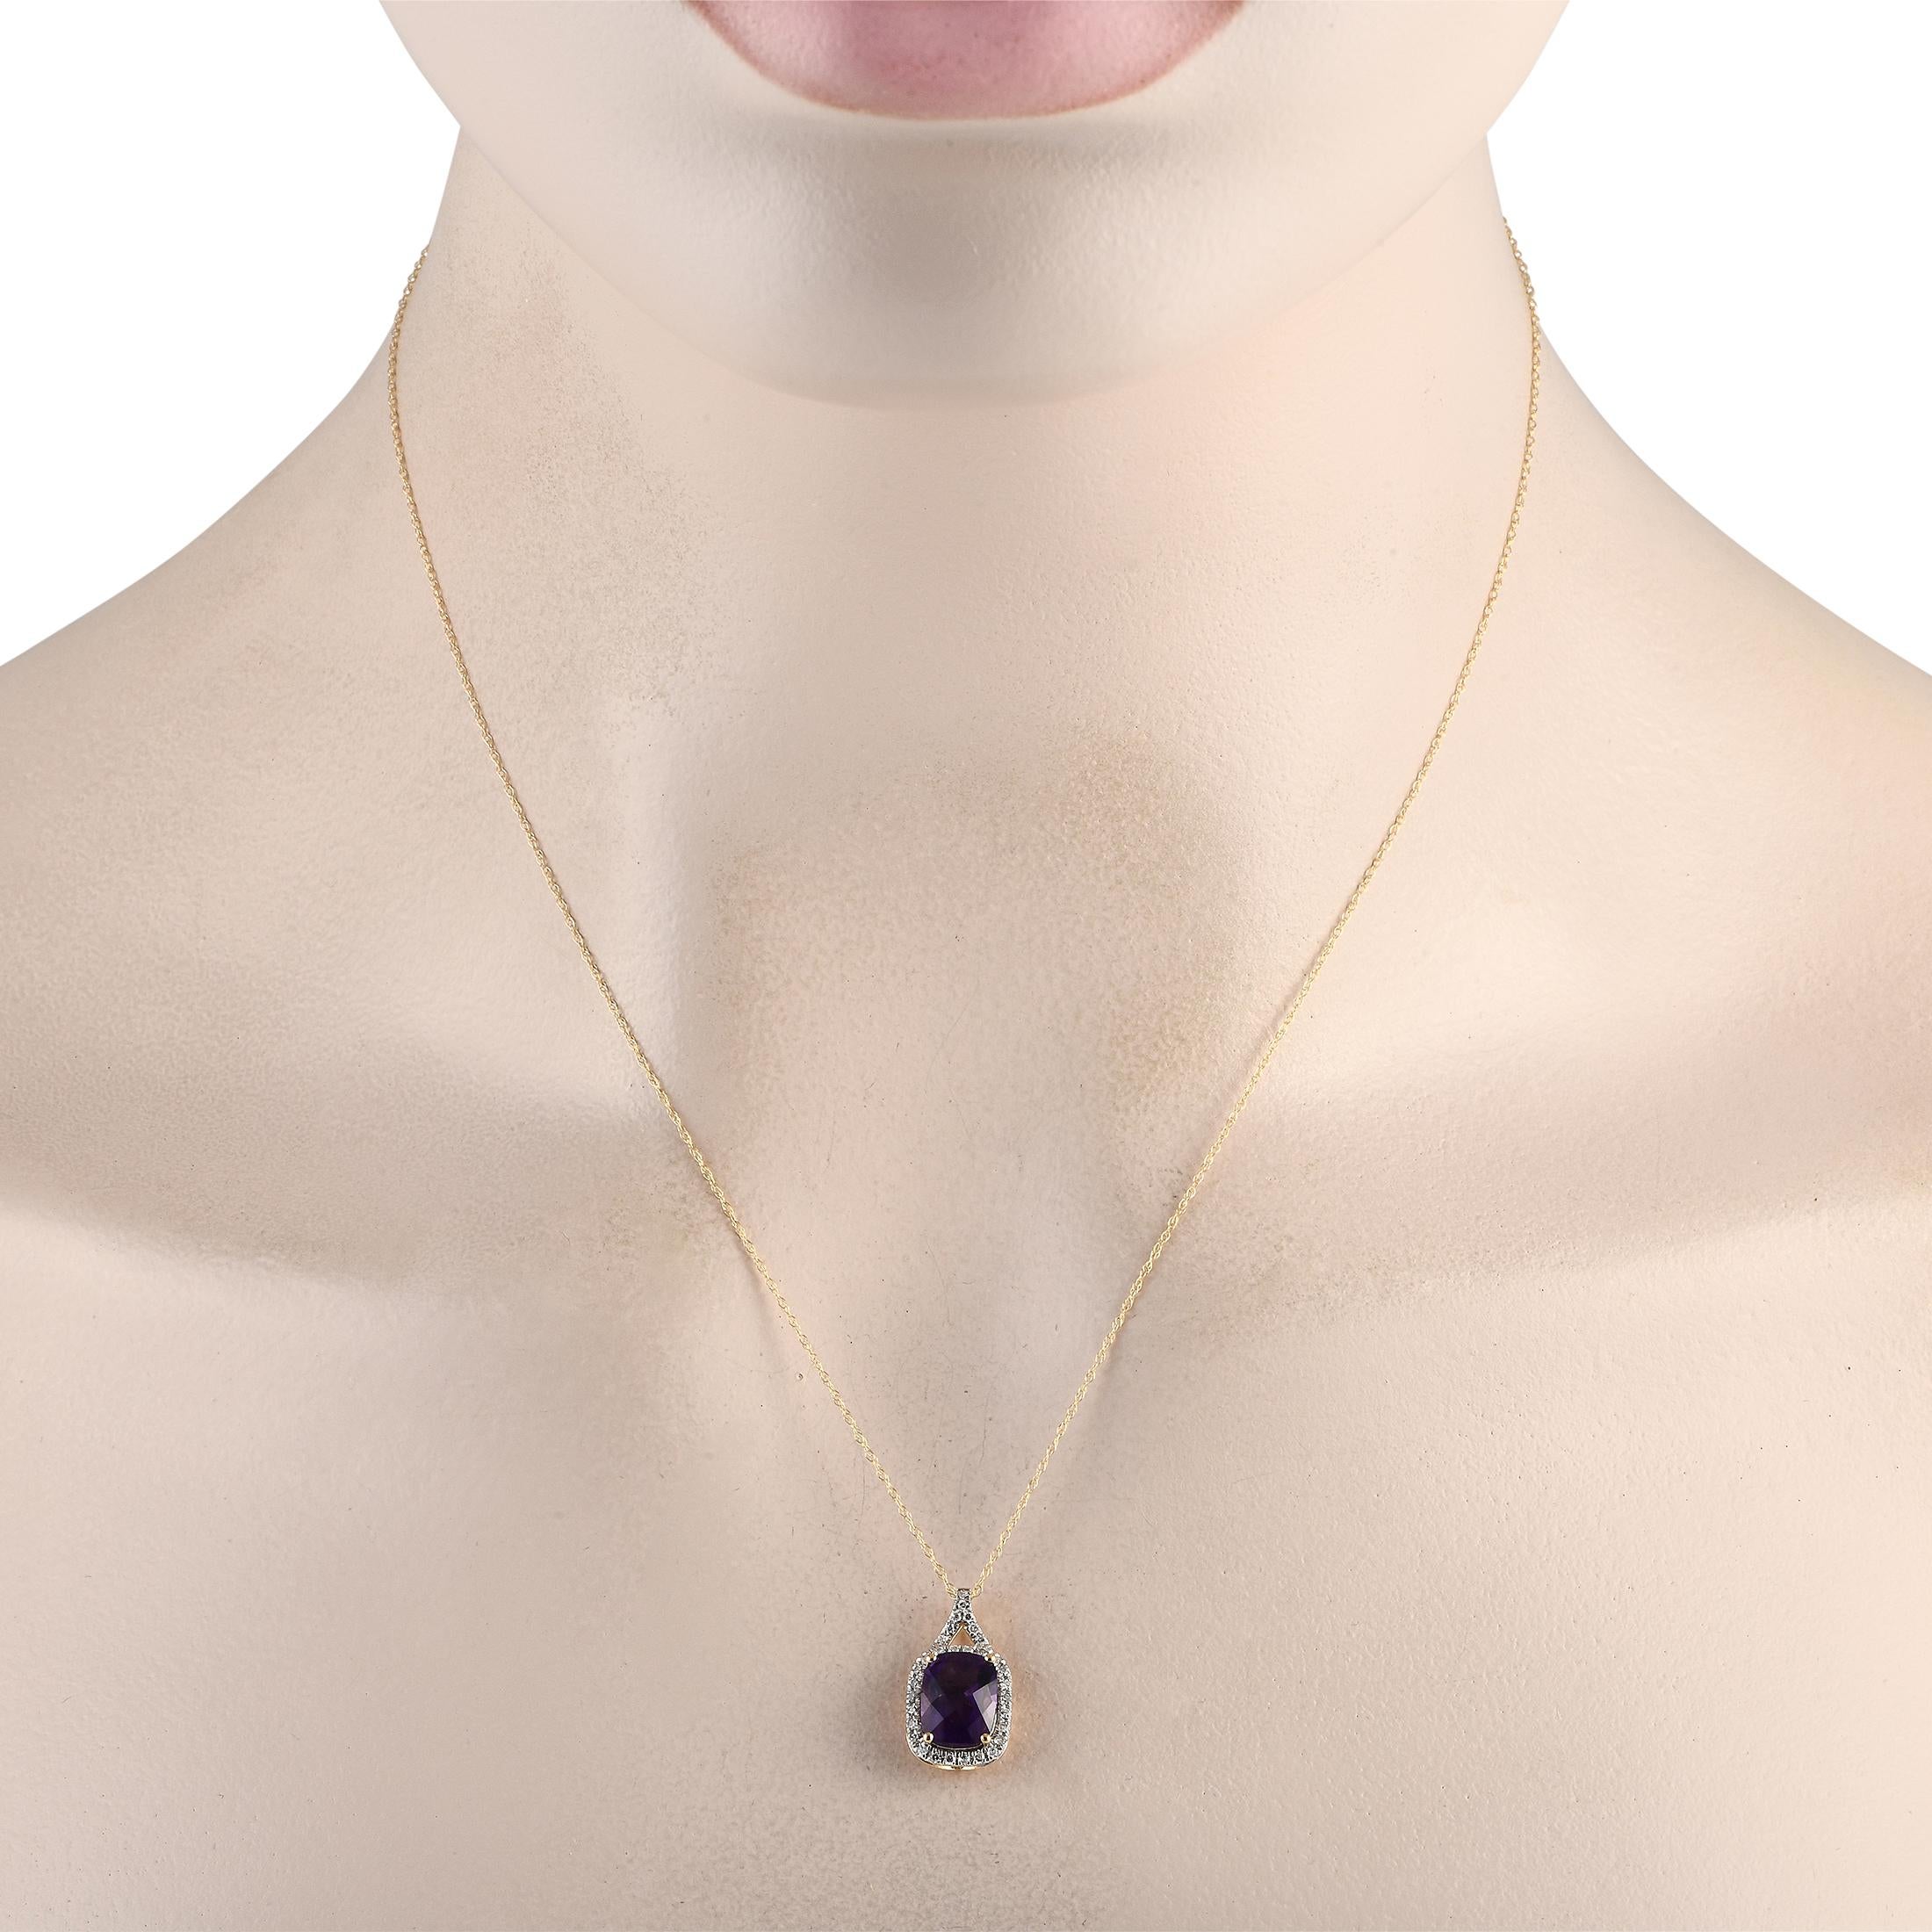 This 14K yellow gold necklace is simple, elegant, and understated. Along with a breathtaking amethyst gemstone, it comes complete with sparkling diamond accents totaling 0.13 carats. This pieces pendant measures 0.75 long by 0.45 wide and is